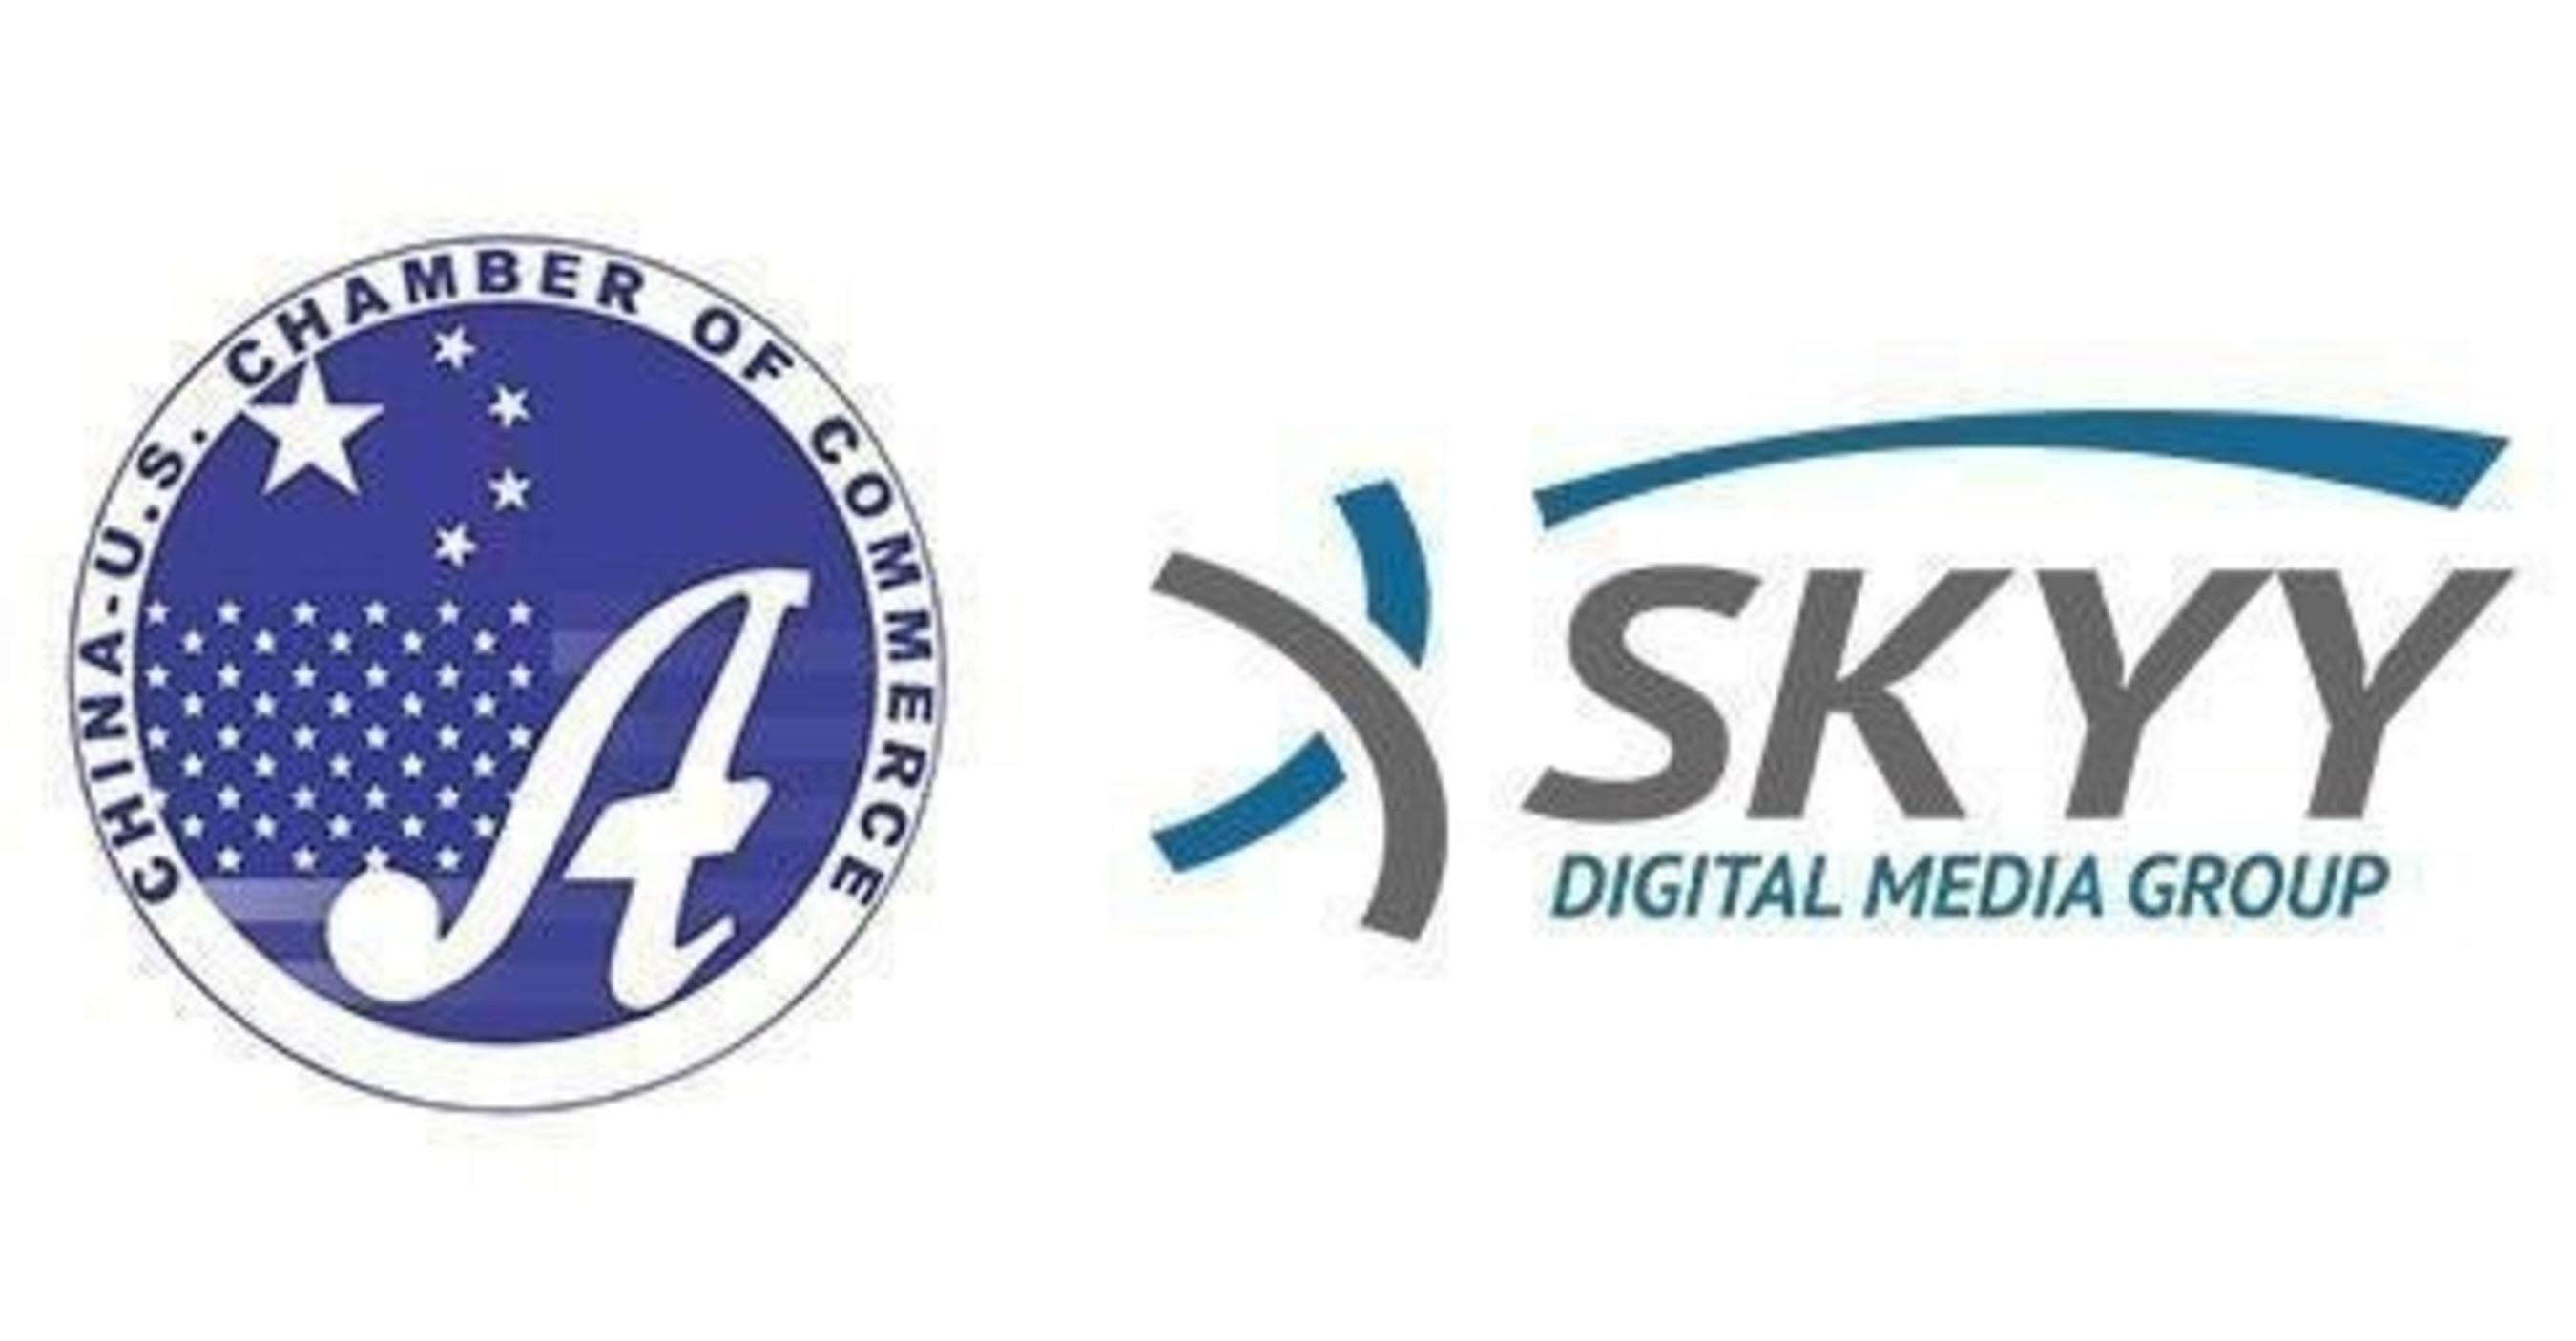 China-US Chamber of Commerce and SKYY Digital Media Group